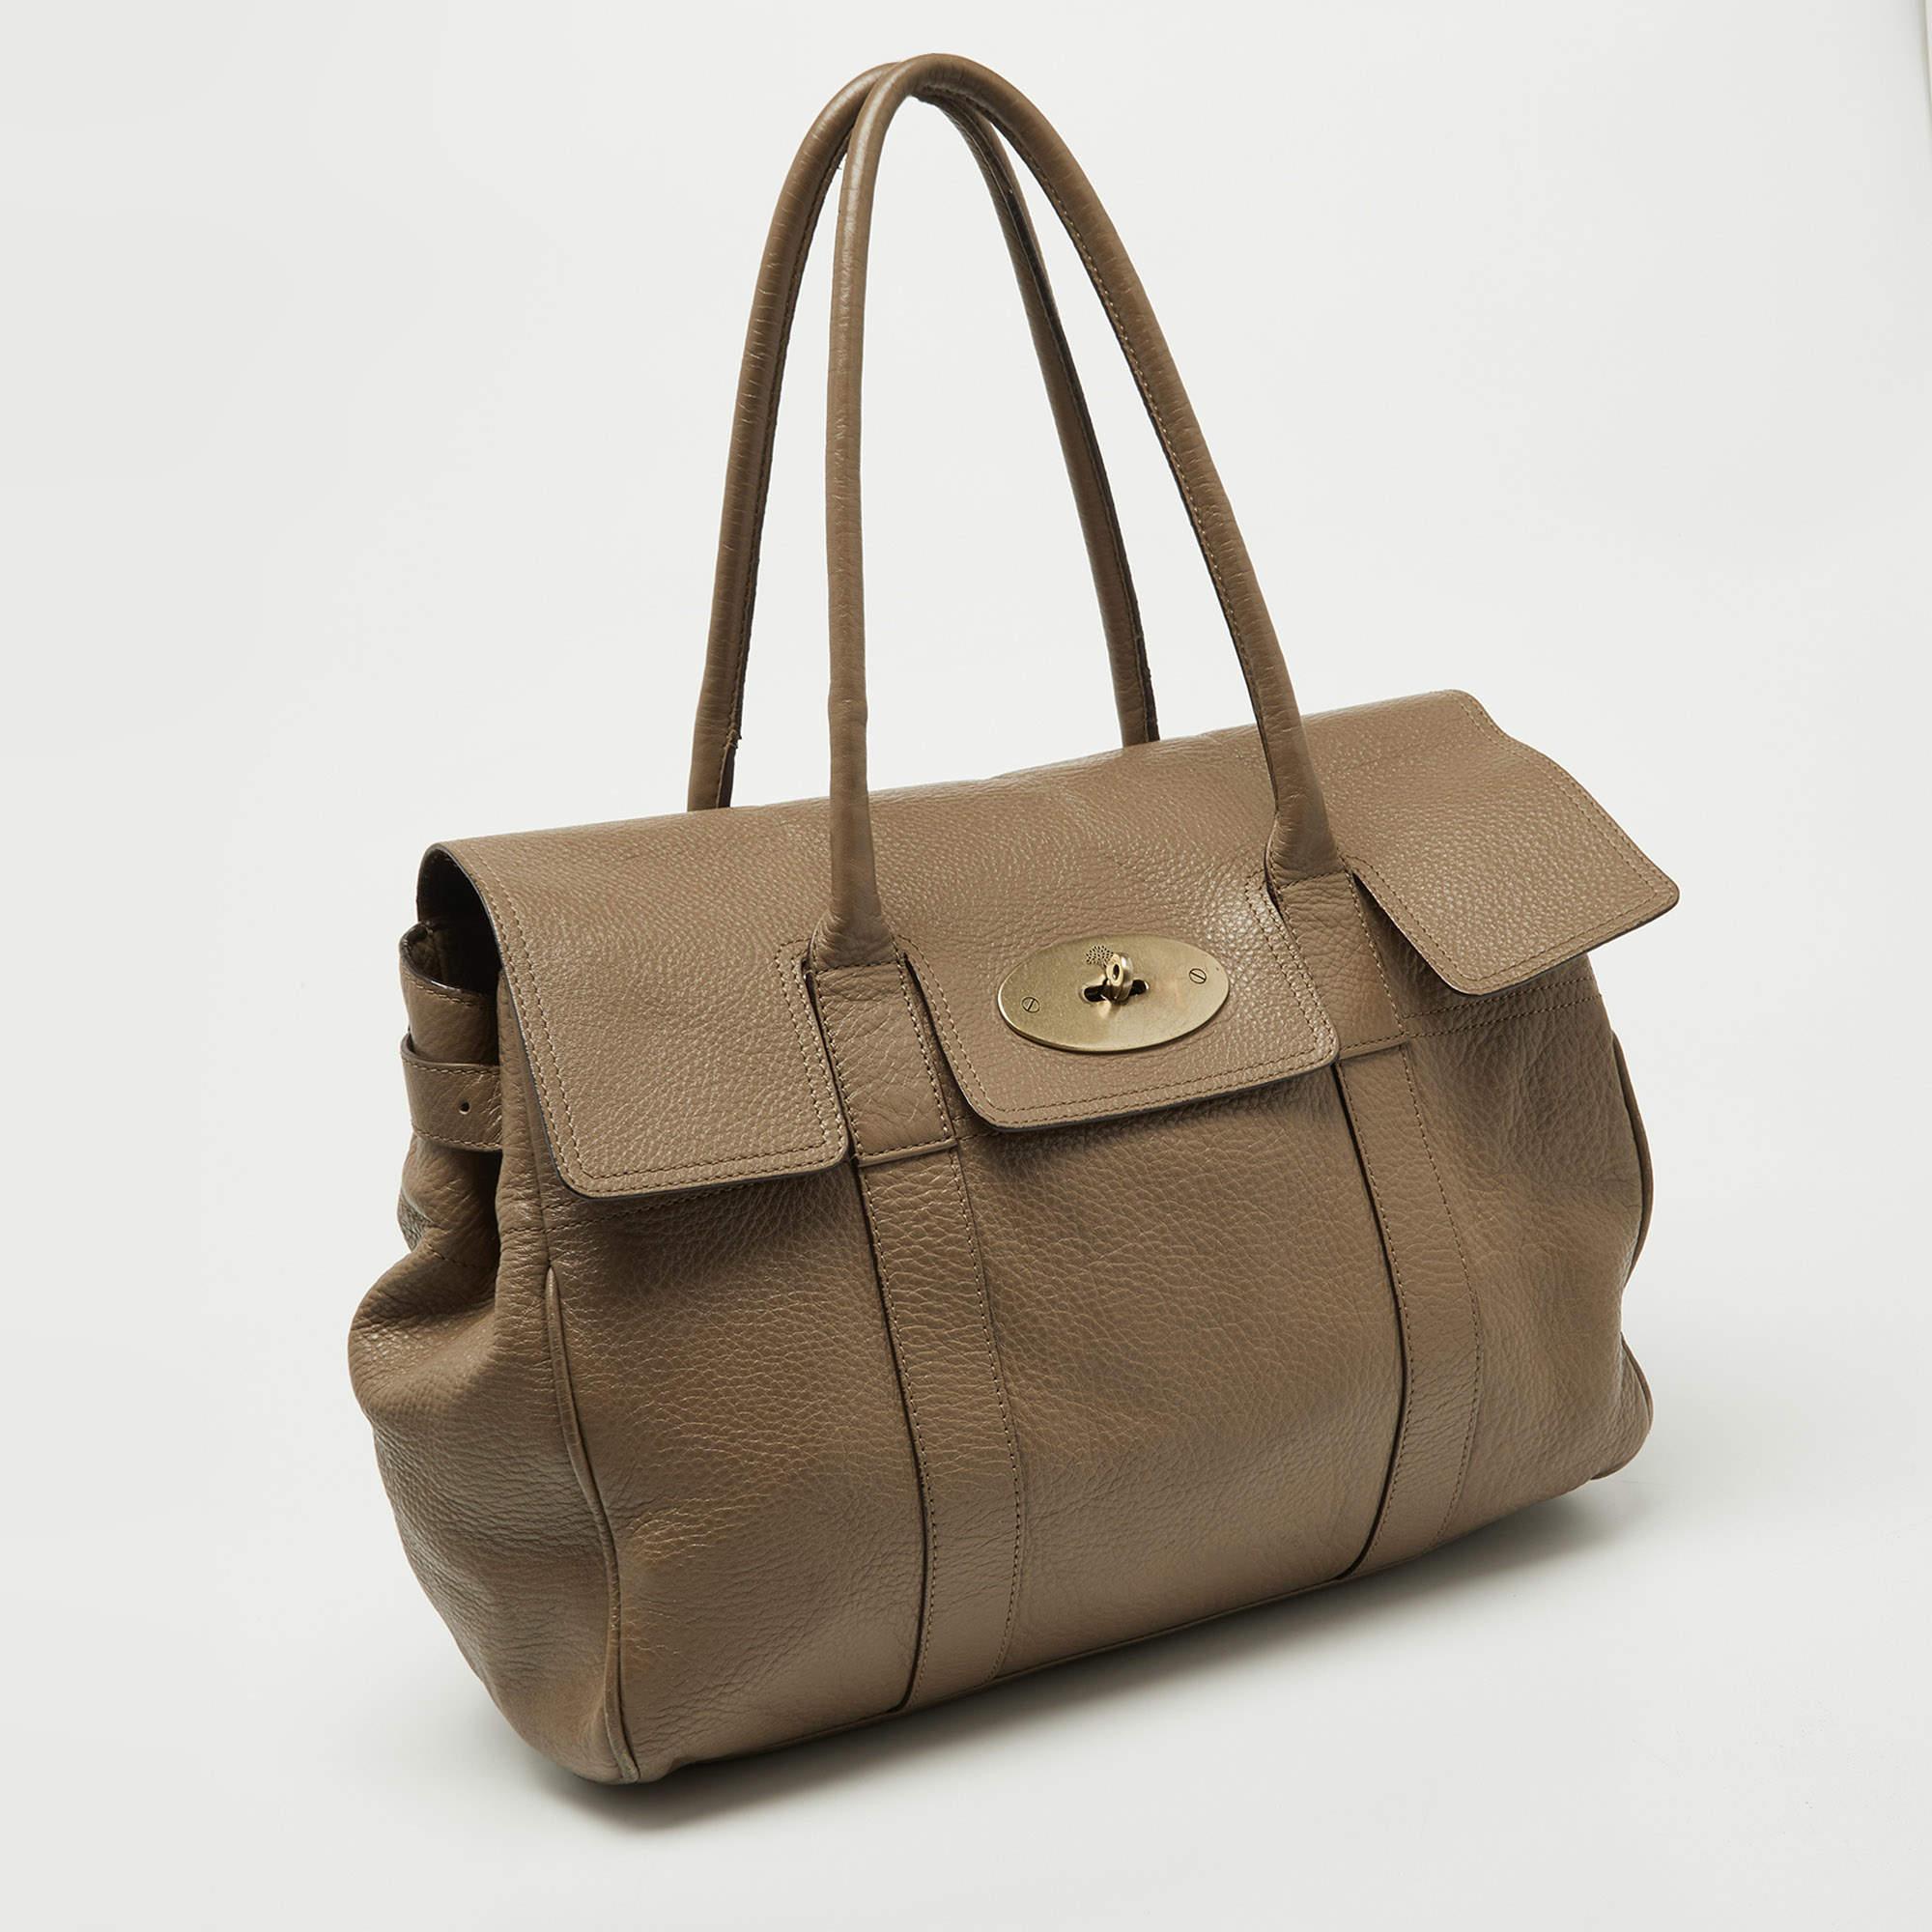 The Bayswater is one of the most well-known collections from Mulberry, so it's fair to say that this satchel is worth the buy. Crafted from leather, the bag is equipped with two handles and a turn lock on the flap securing a capacious compartment